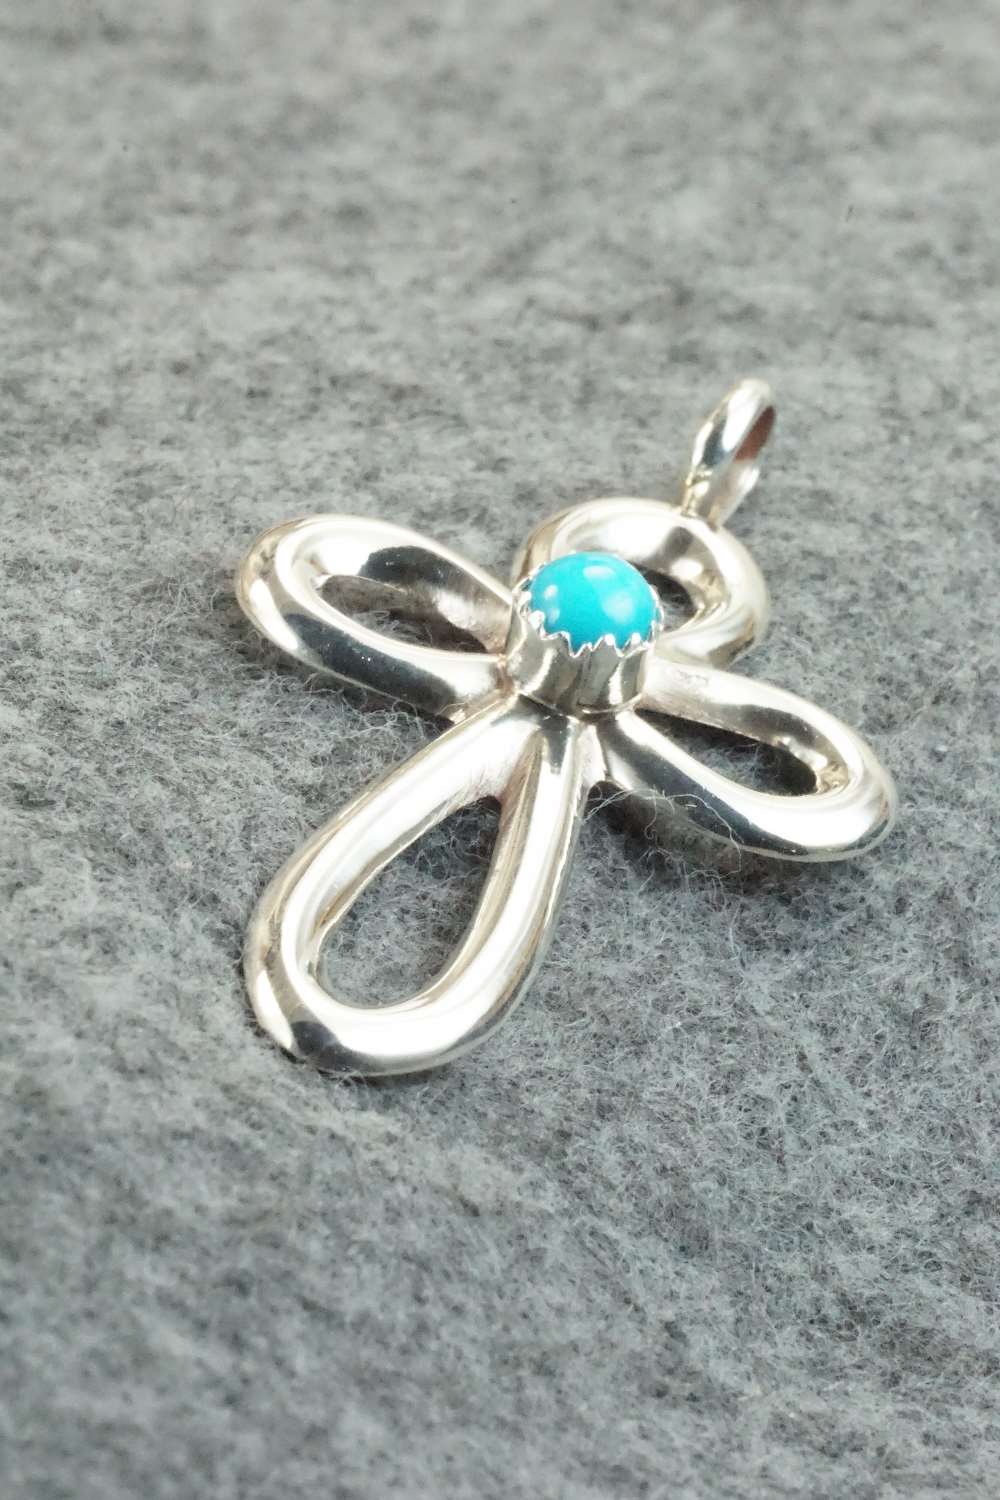 Turquoise & Sterling Silver Cross Pendant - Vanessa Kee